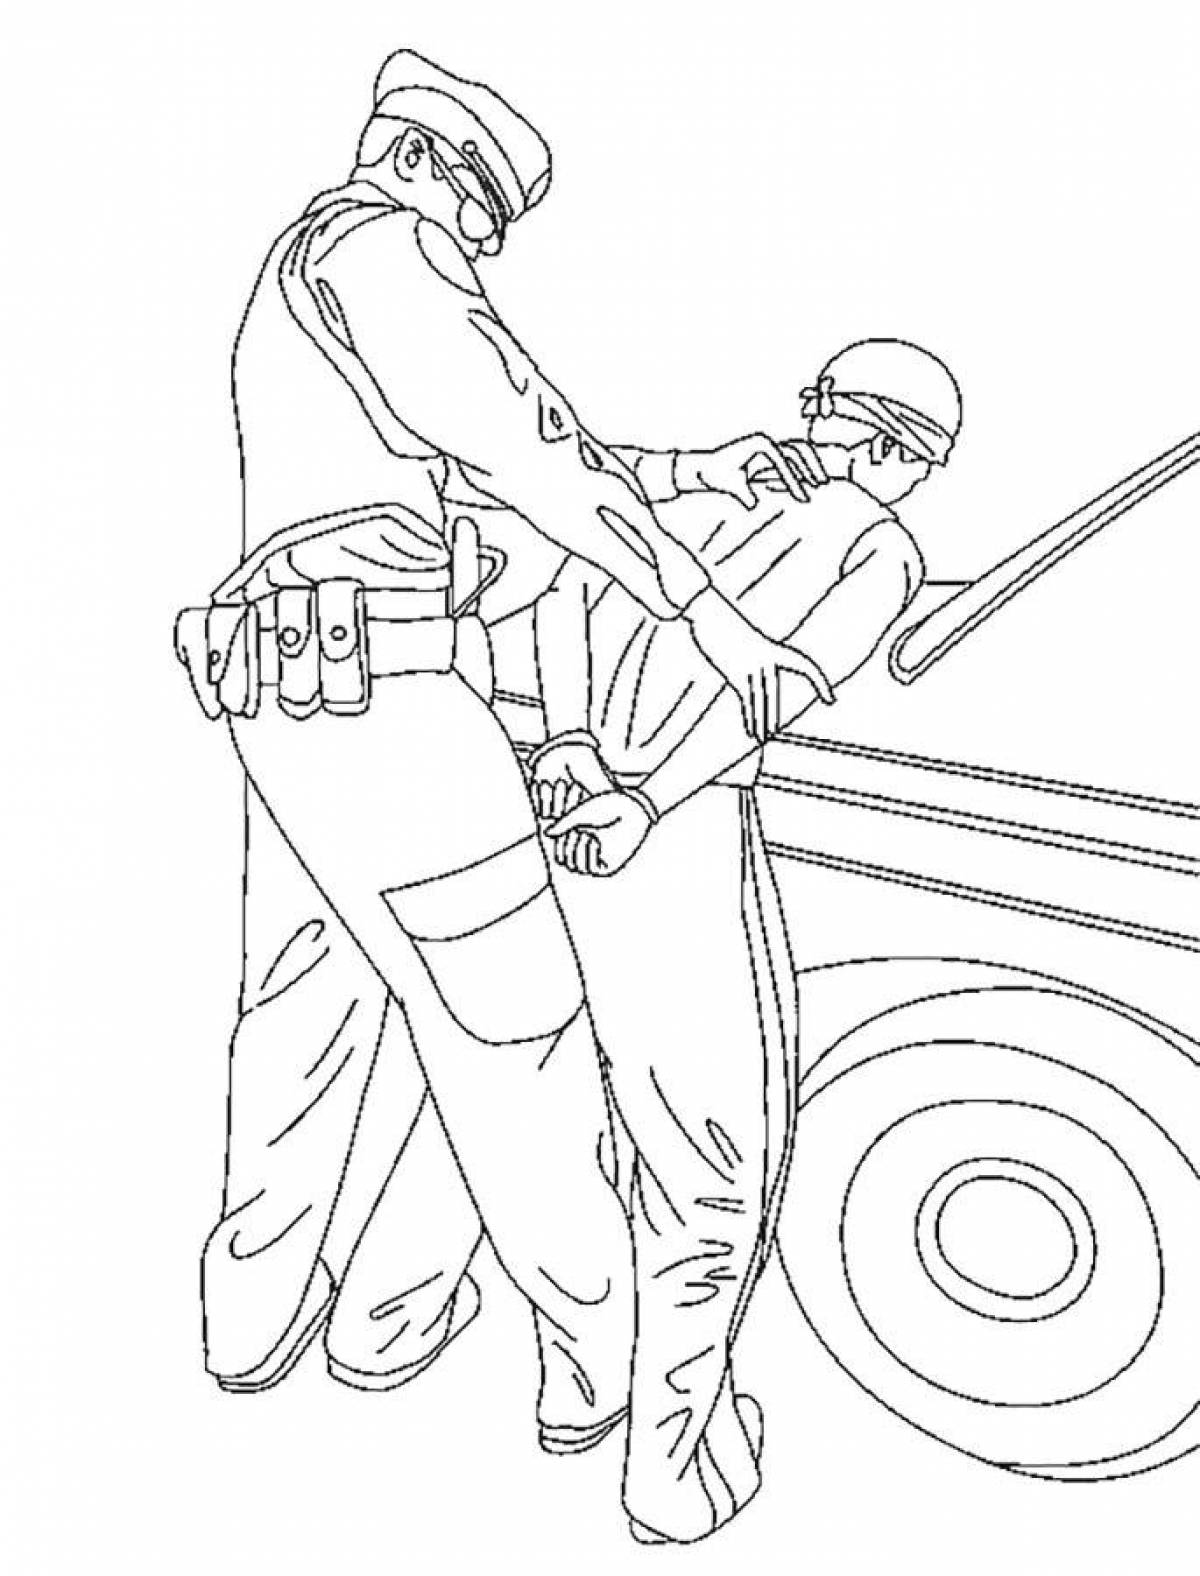 Coloring exquisite policeman